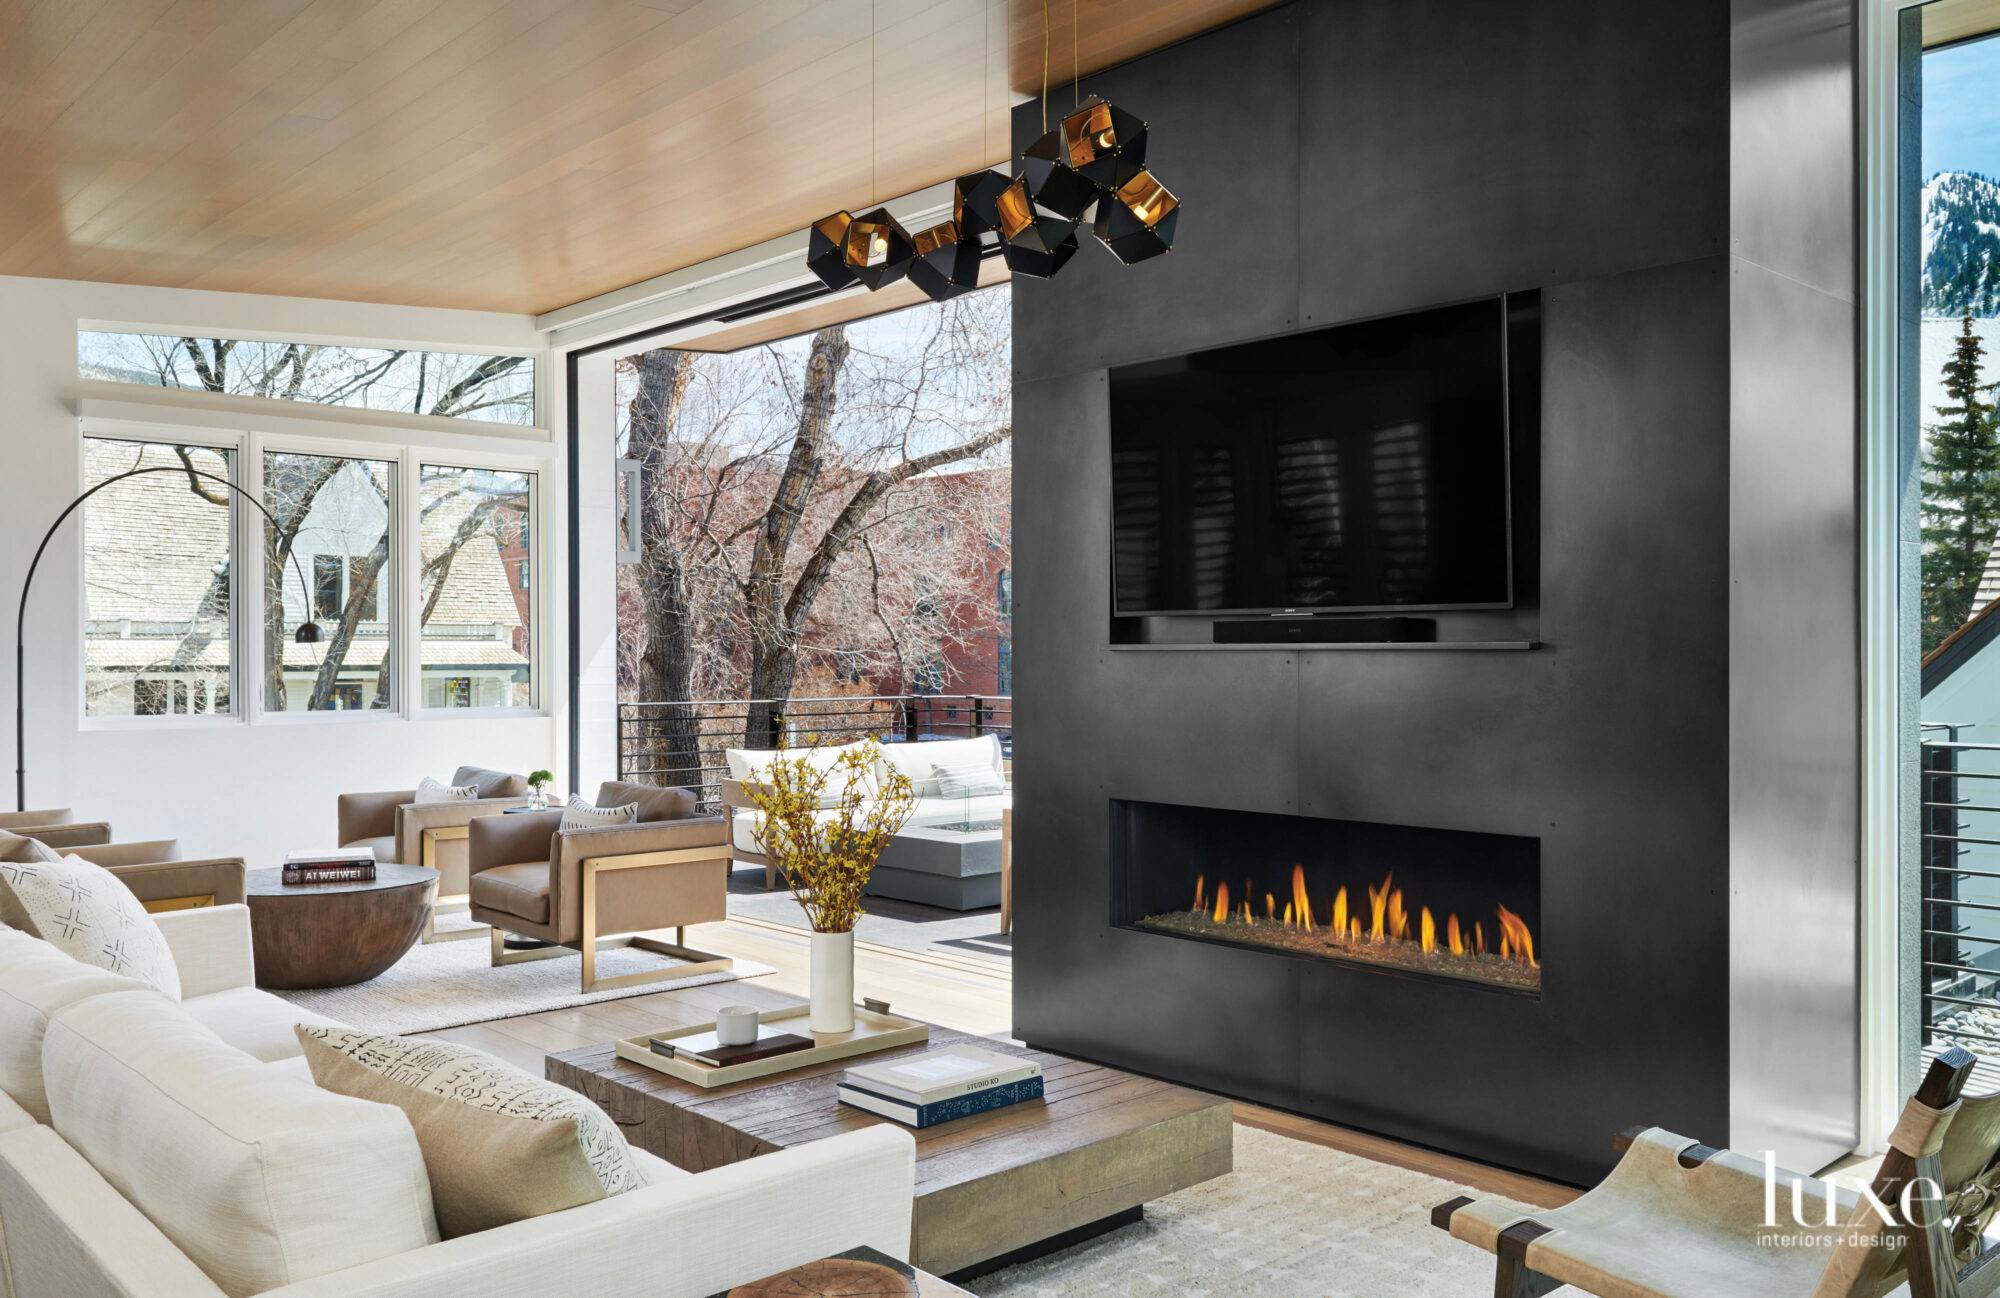 In the living room, a fireplace is surrounded by steel, a large sliding door opens to the outside.